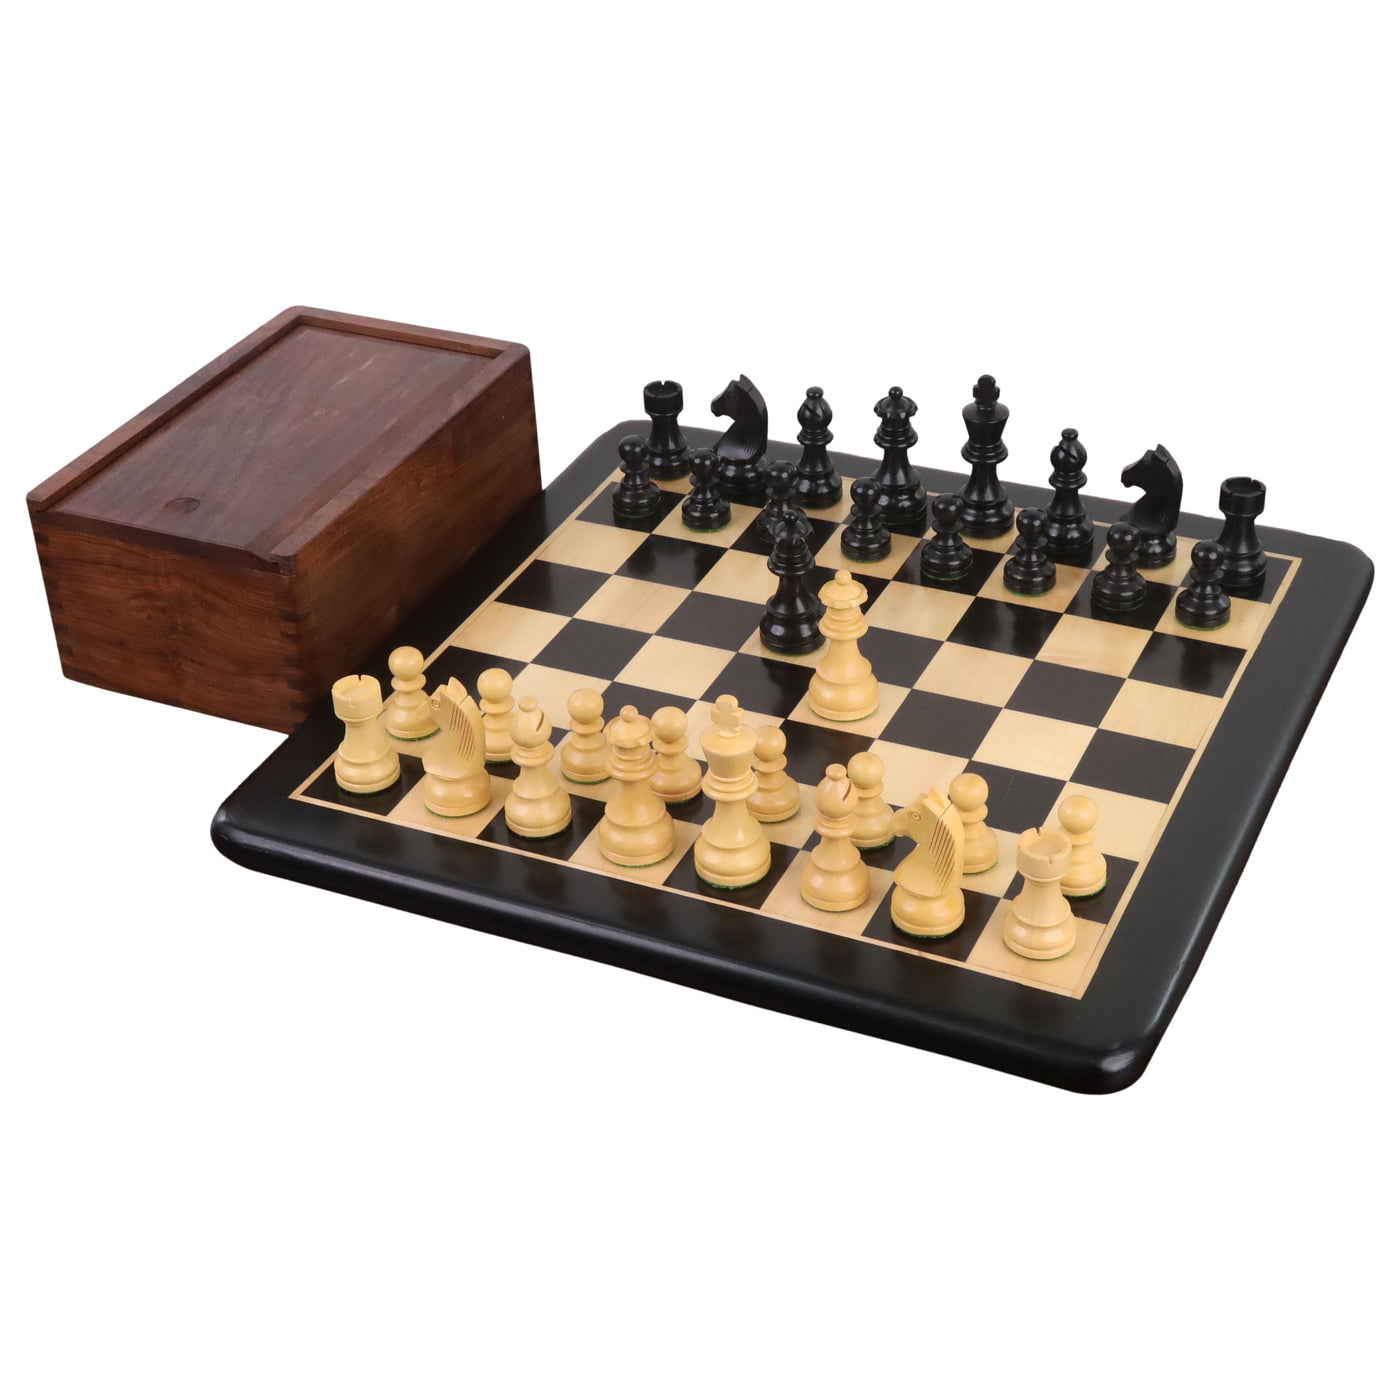 Combo of 3.3" Tournament Staunton Chess Set - Chess Pieces Only with Board and Box